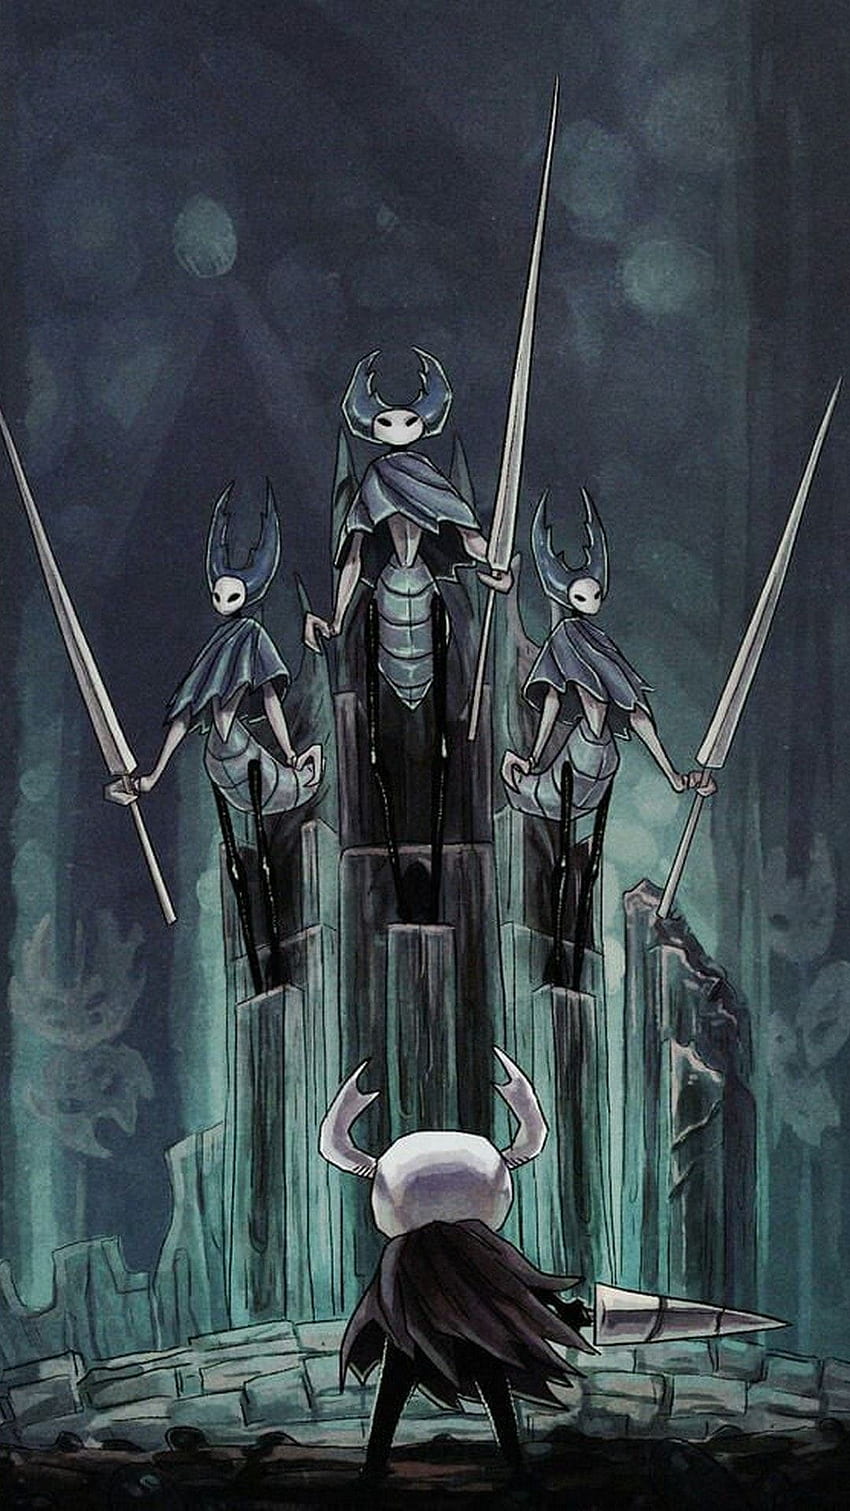  Cool Hollow Knight Wallpaper for your Phone  Wallpapers Clan 